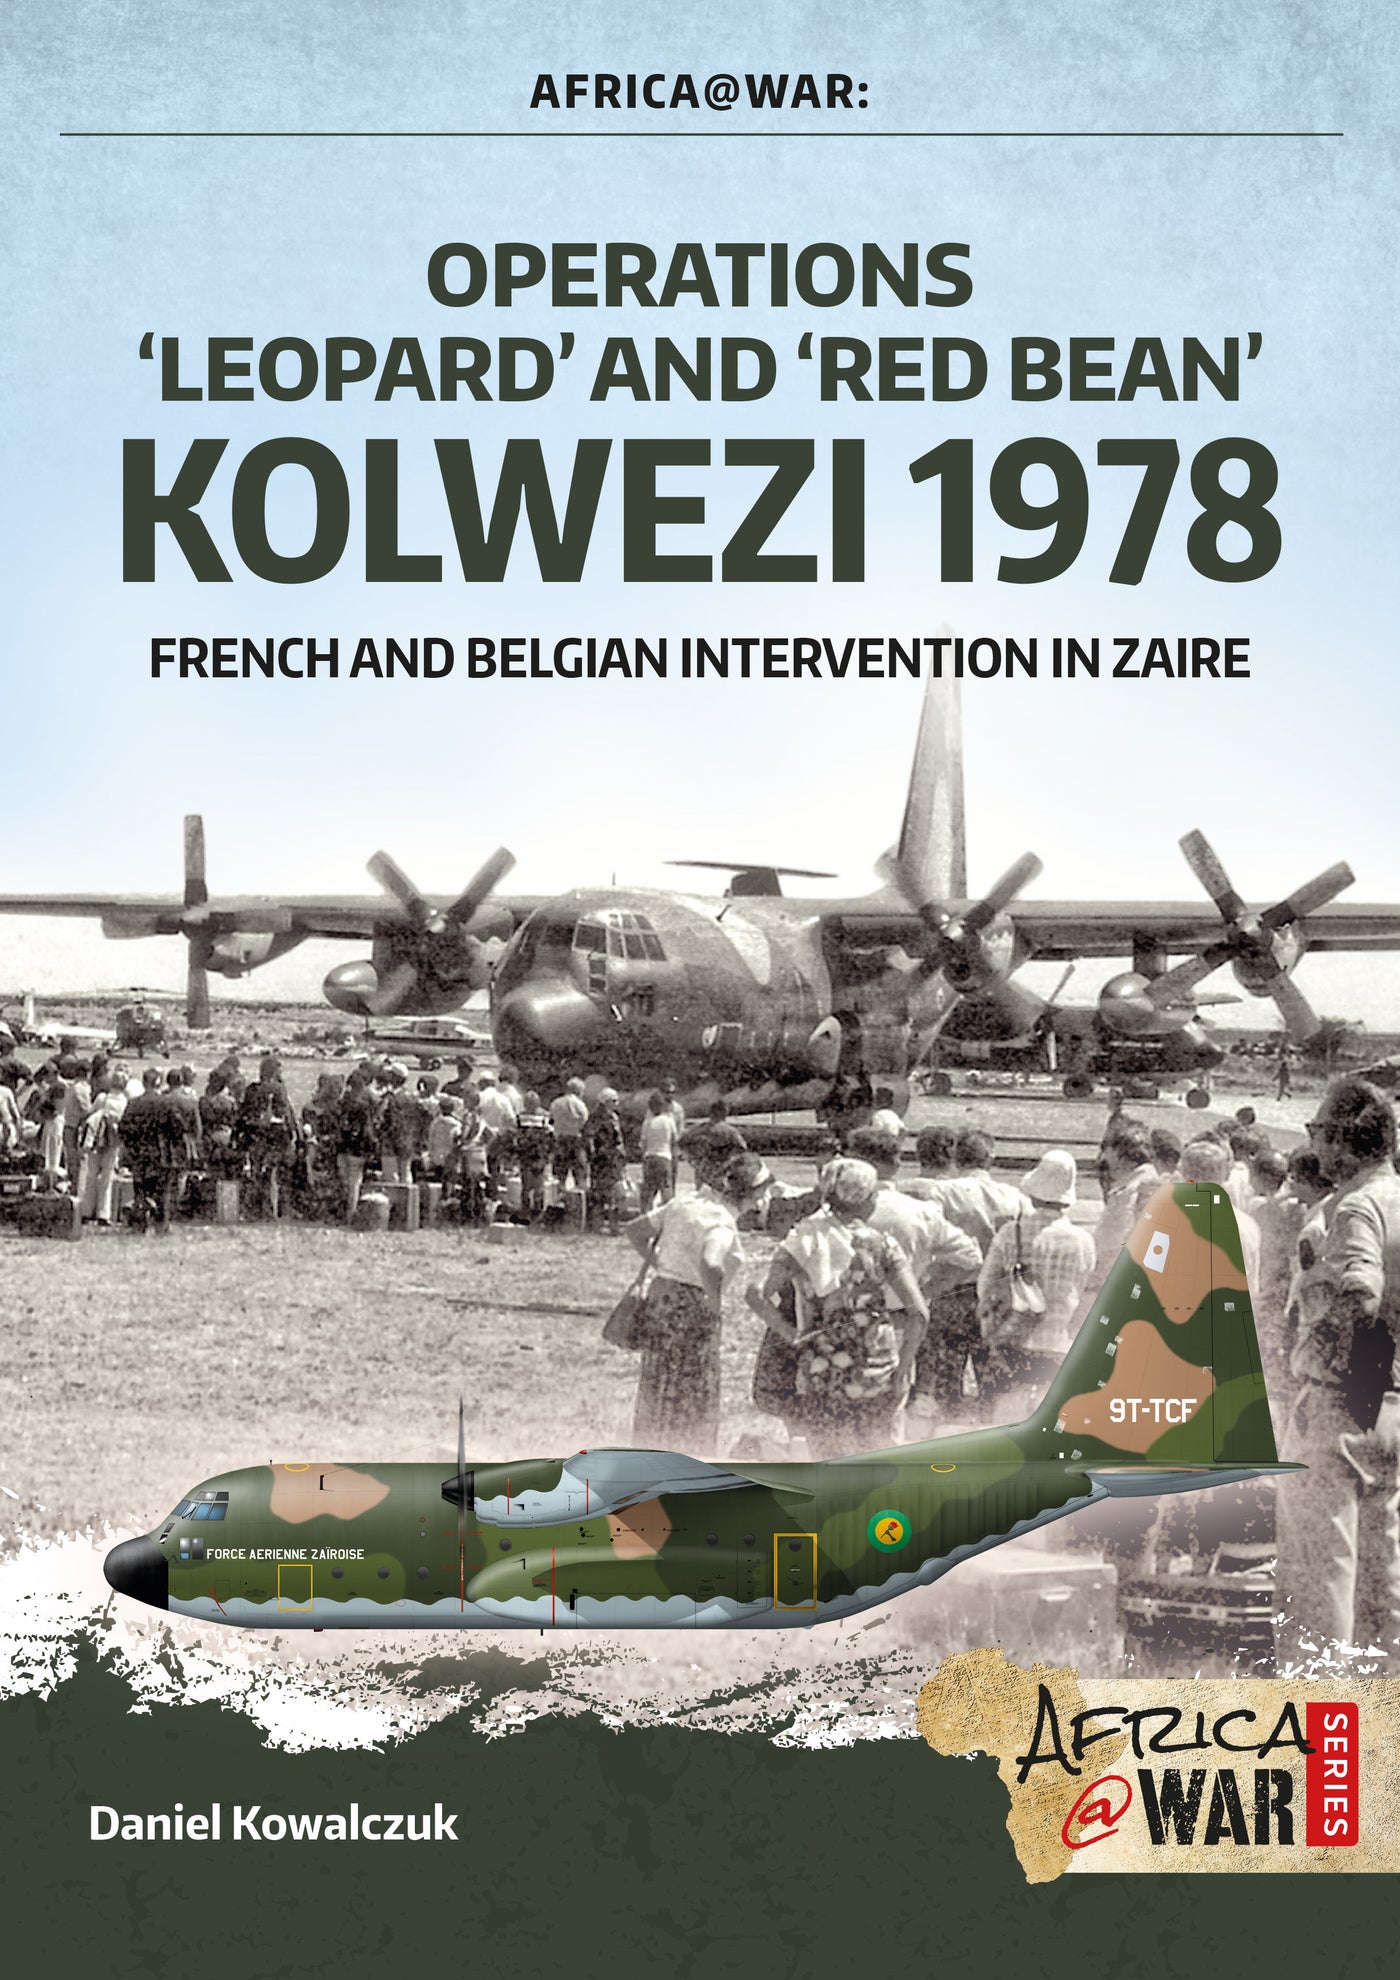 Operations ‘Leopard’ and ‘Red Bean’ - Kolwezi 1978